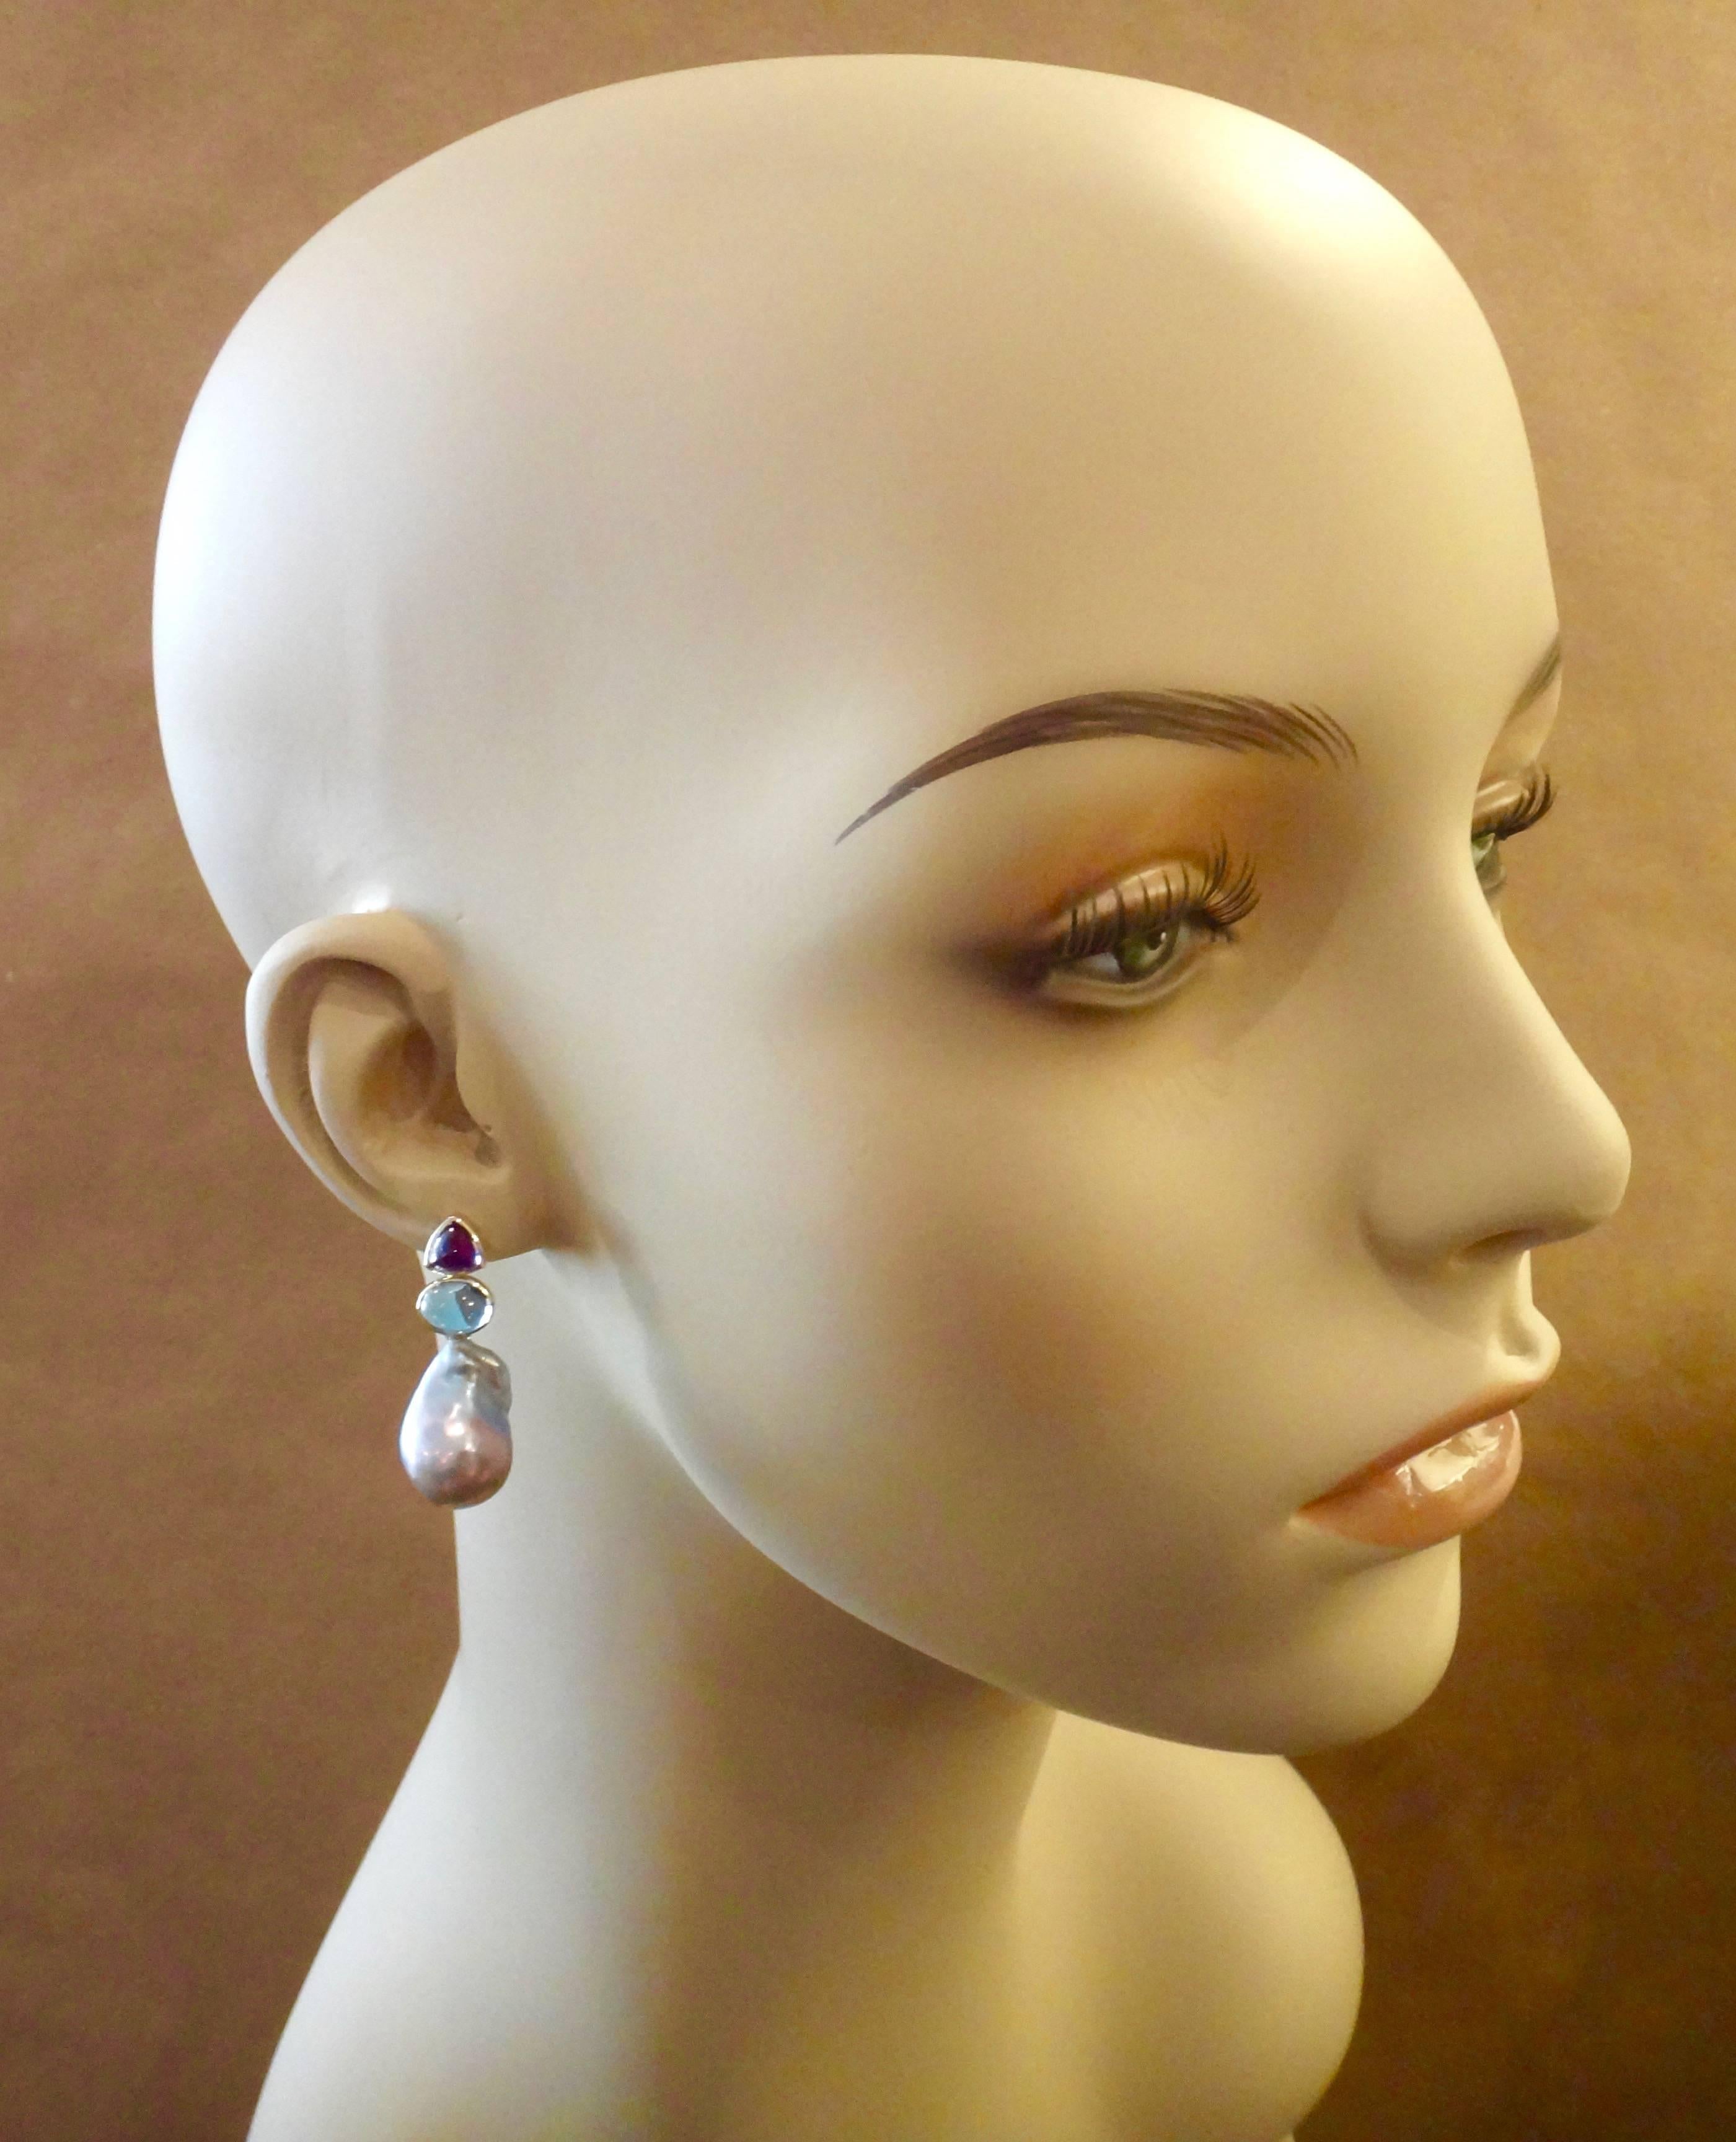 Trillion cabochon amethyst are paired with oval cut cabochon Swiss Blue topaz in these effortless drop earrings.  The expertly bezel set gems magnify the rich purple and blue colors found in a pair of baroque cultured pearls.  The earrings have